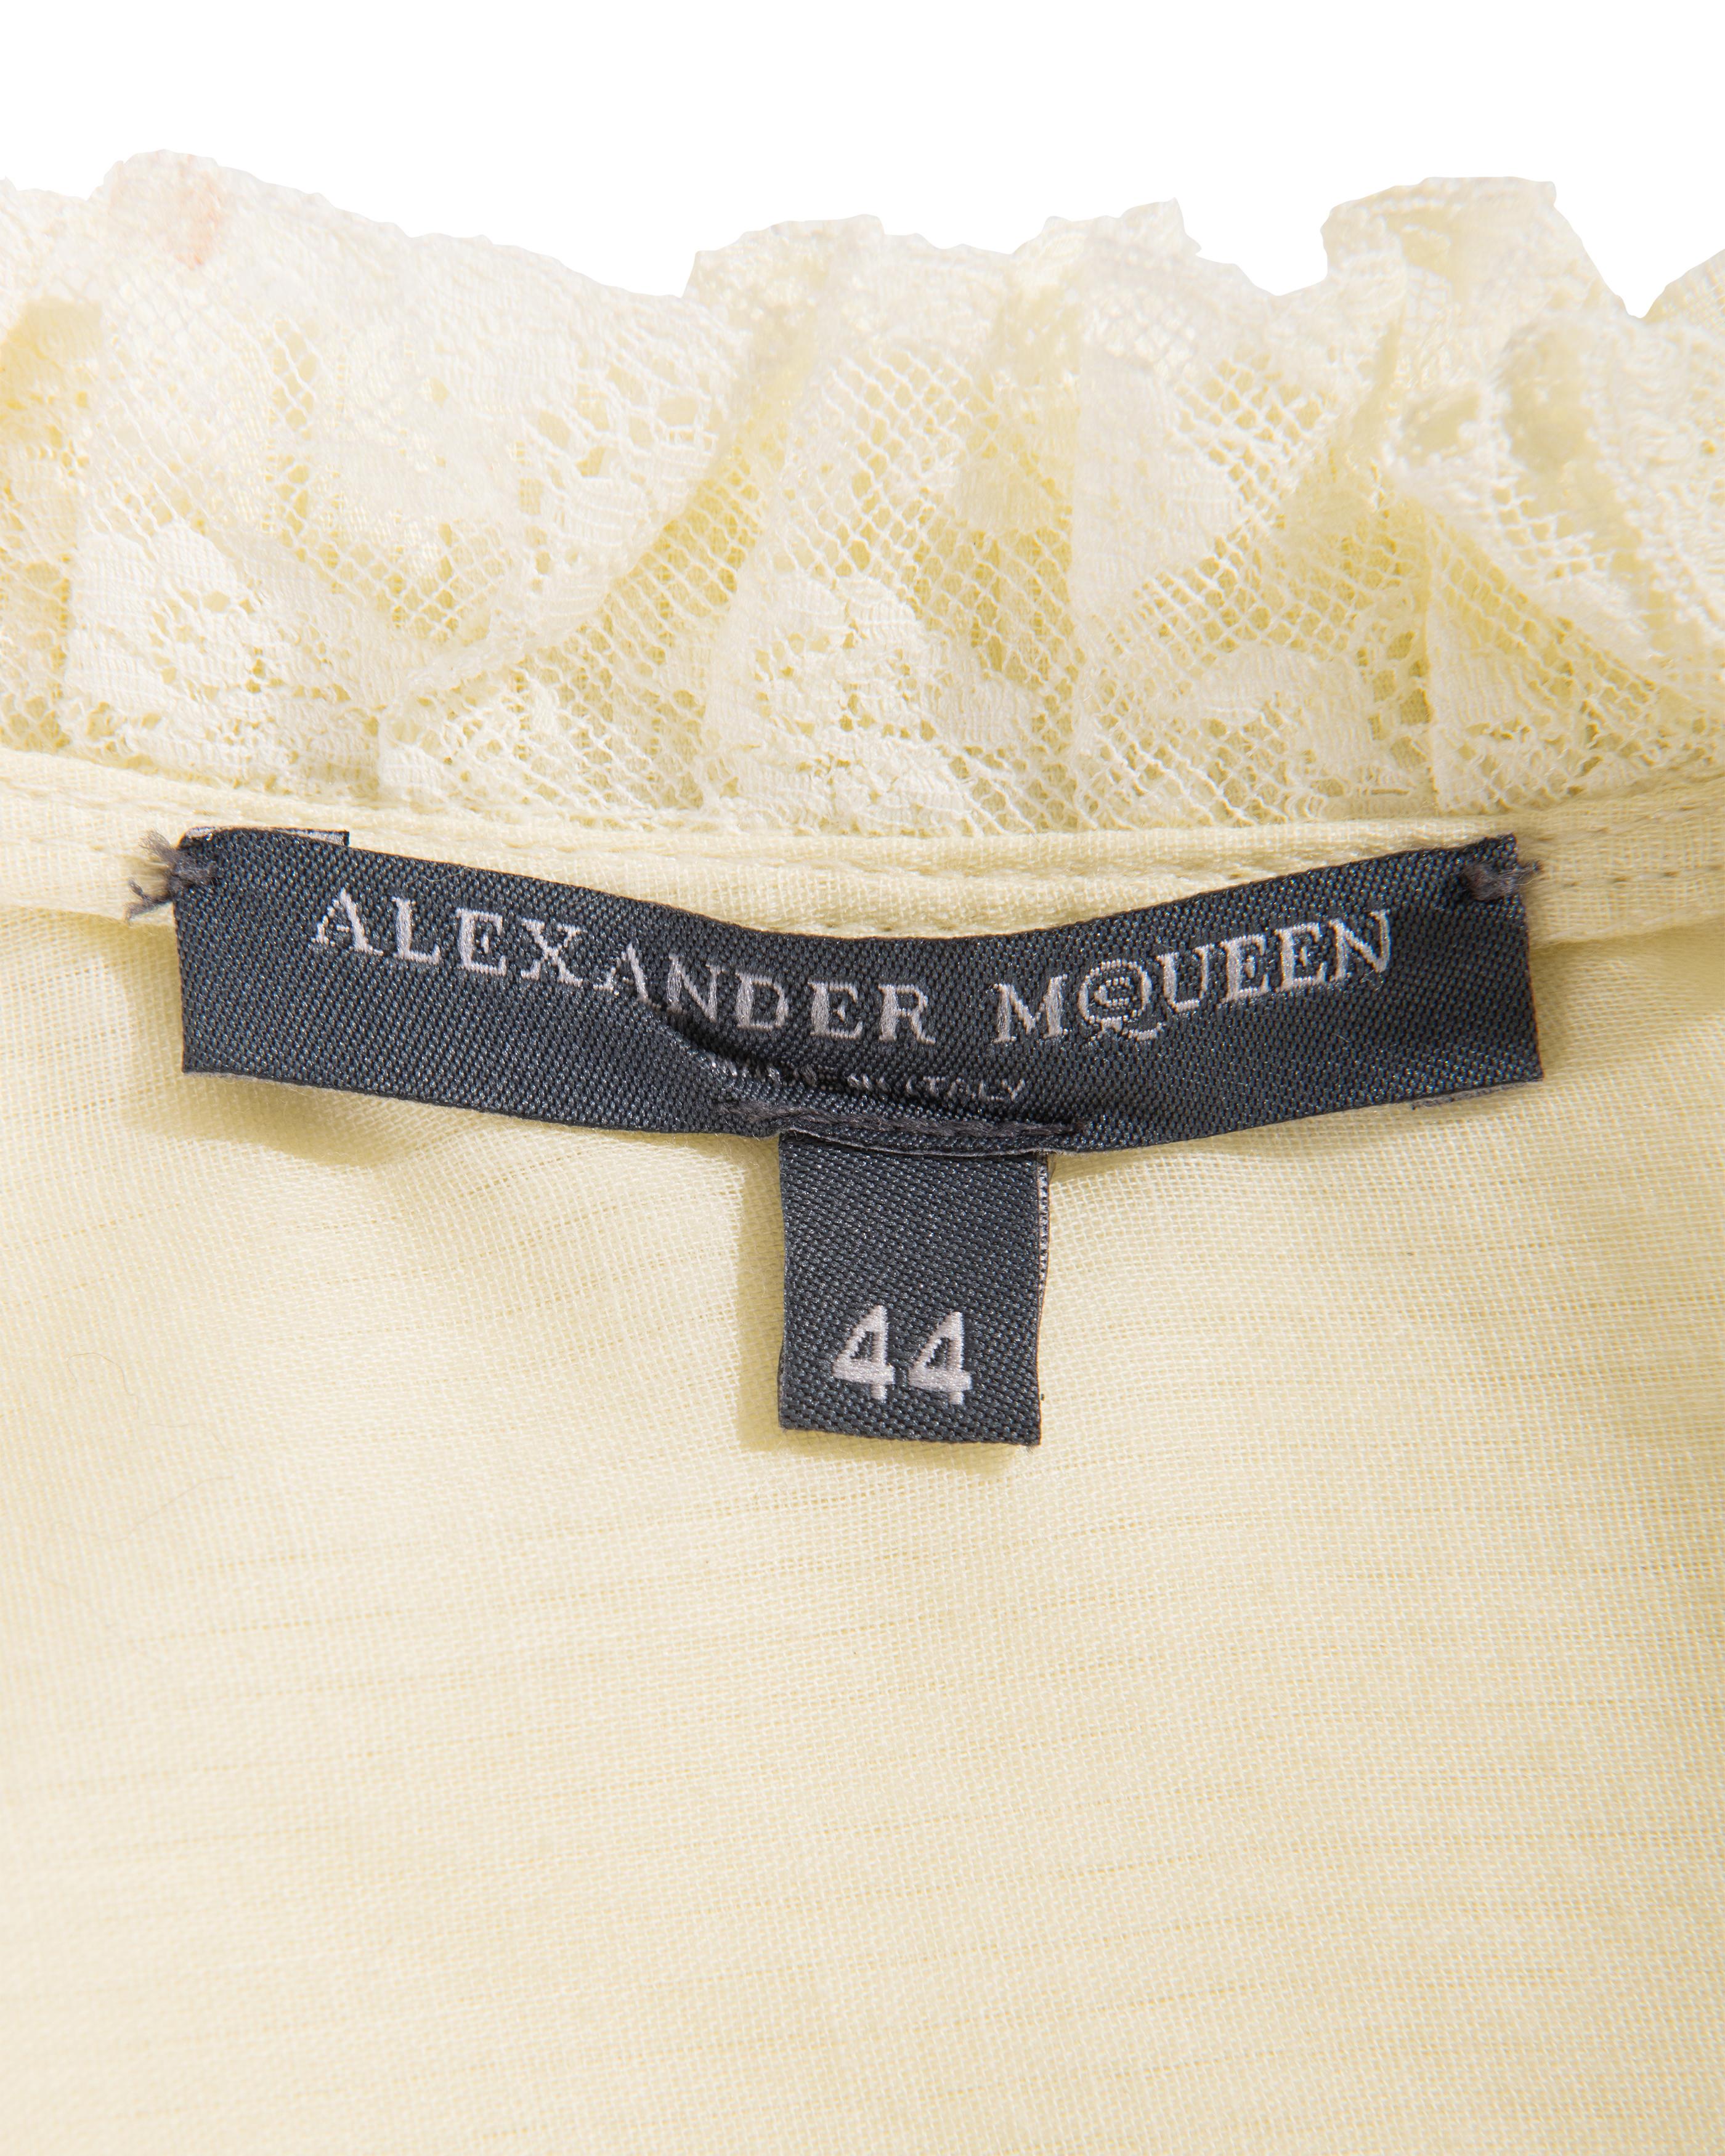 S/S 2005 Alexander McQueen (Lifetime) Pale Yellow Pleated and Lace Cotton Dress 5